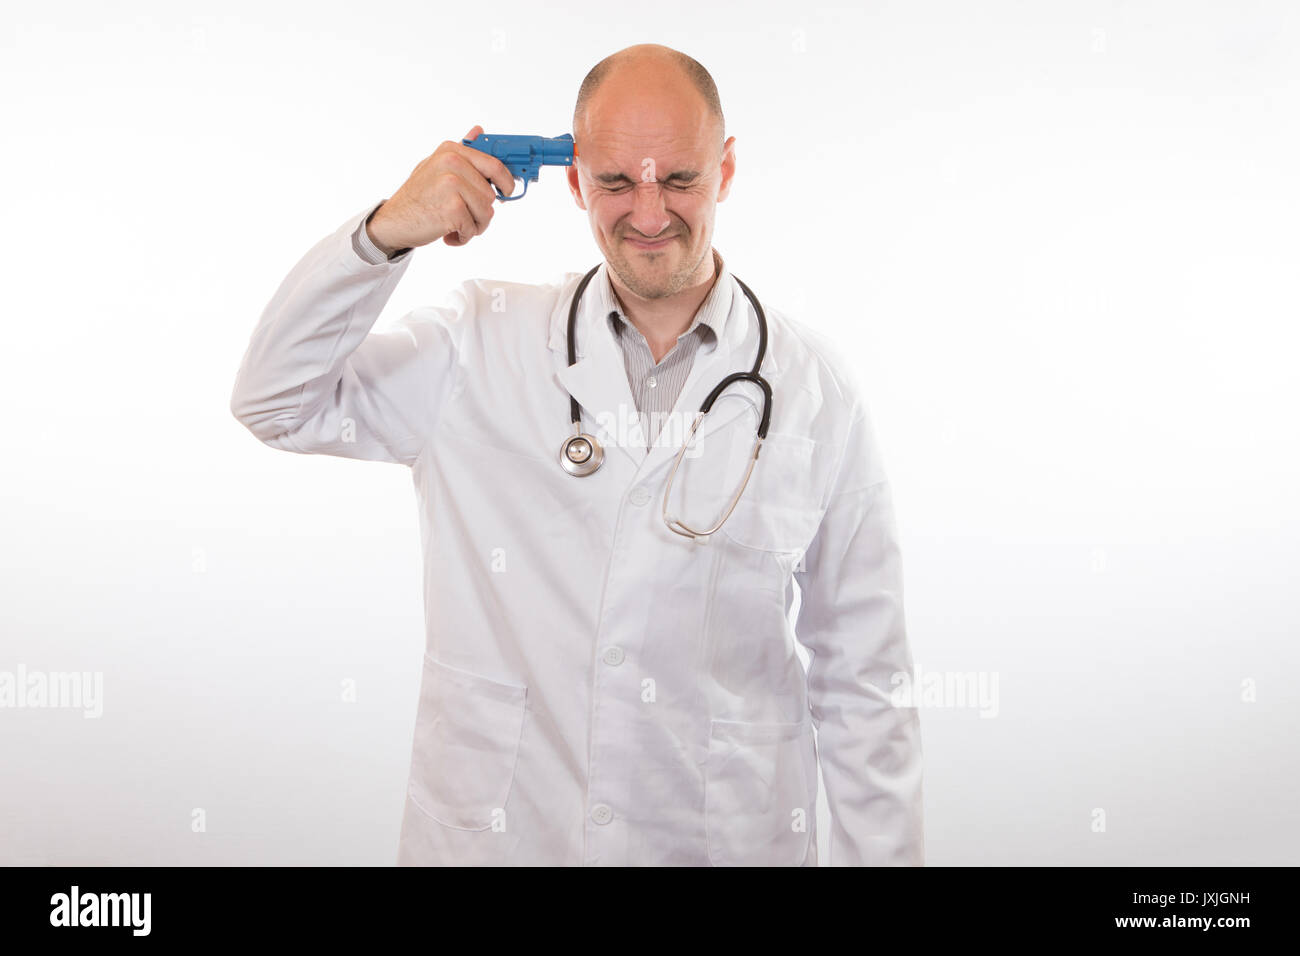 Anguished doctor holding a small blue toy plastic gun to his head with his eyes screwed shut isolated on white in a conceptual image Stock Photo